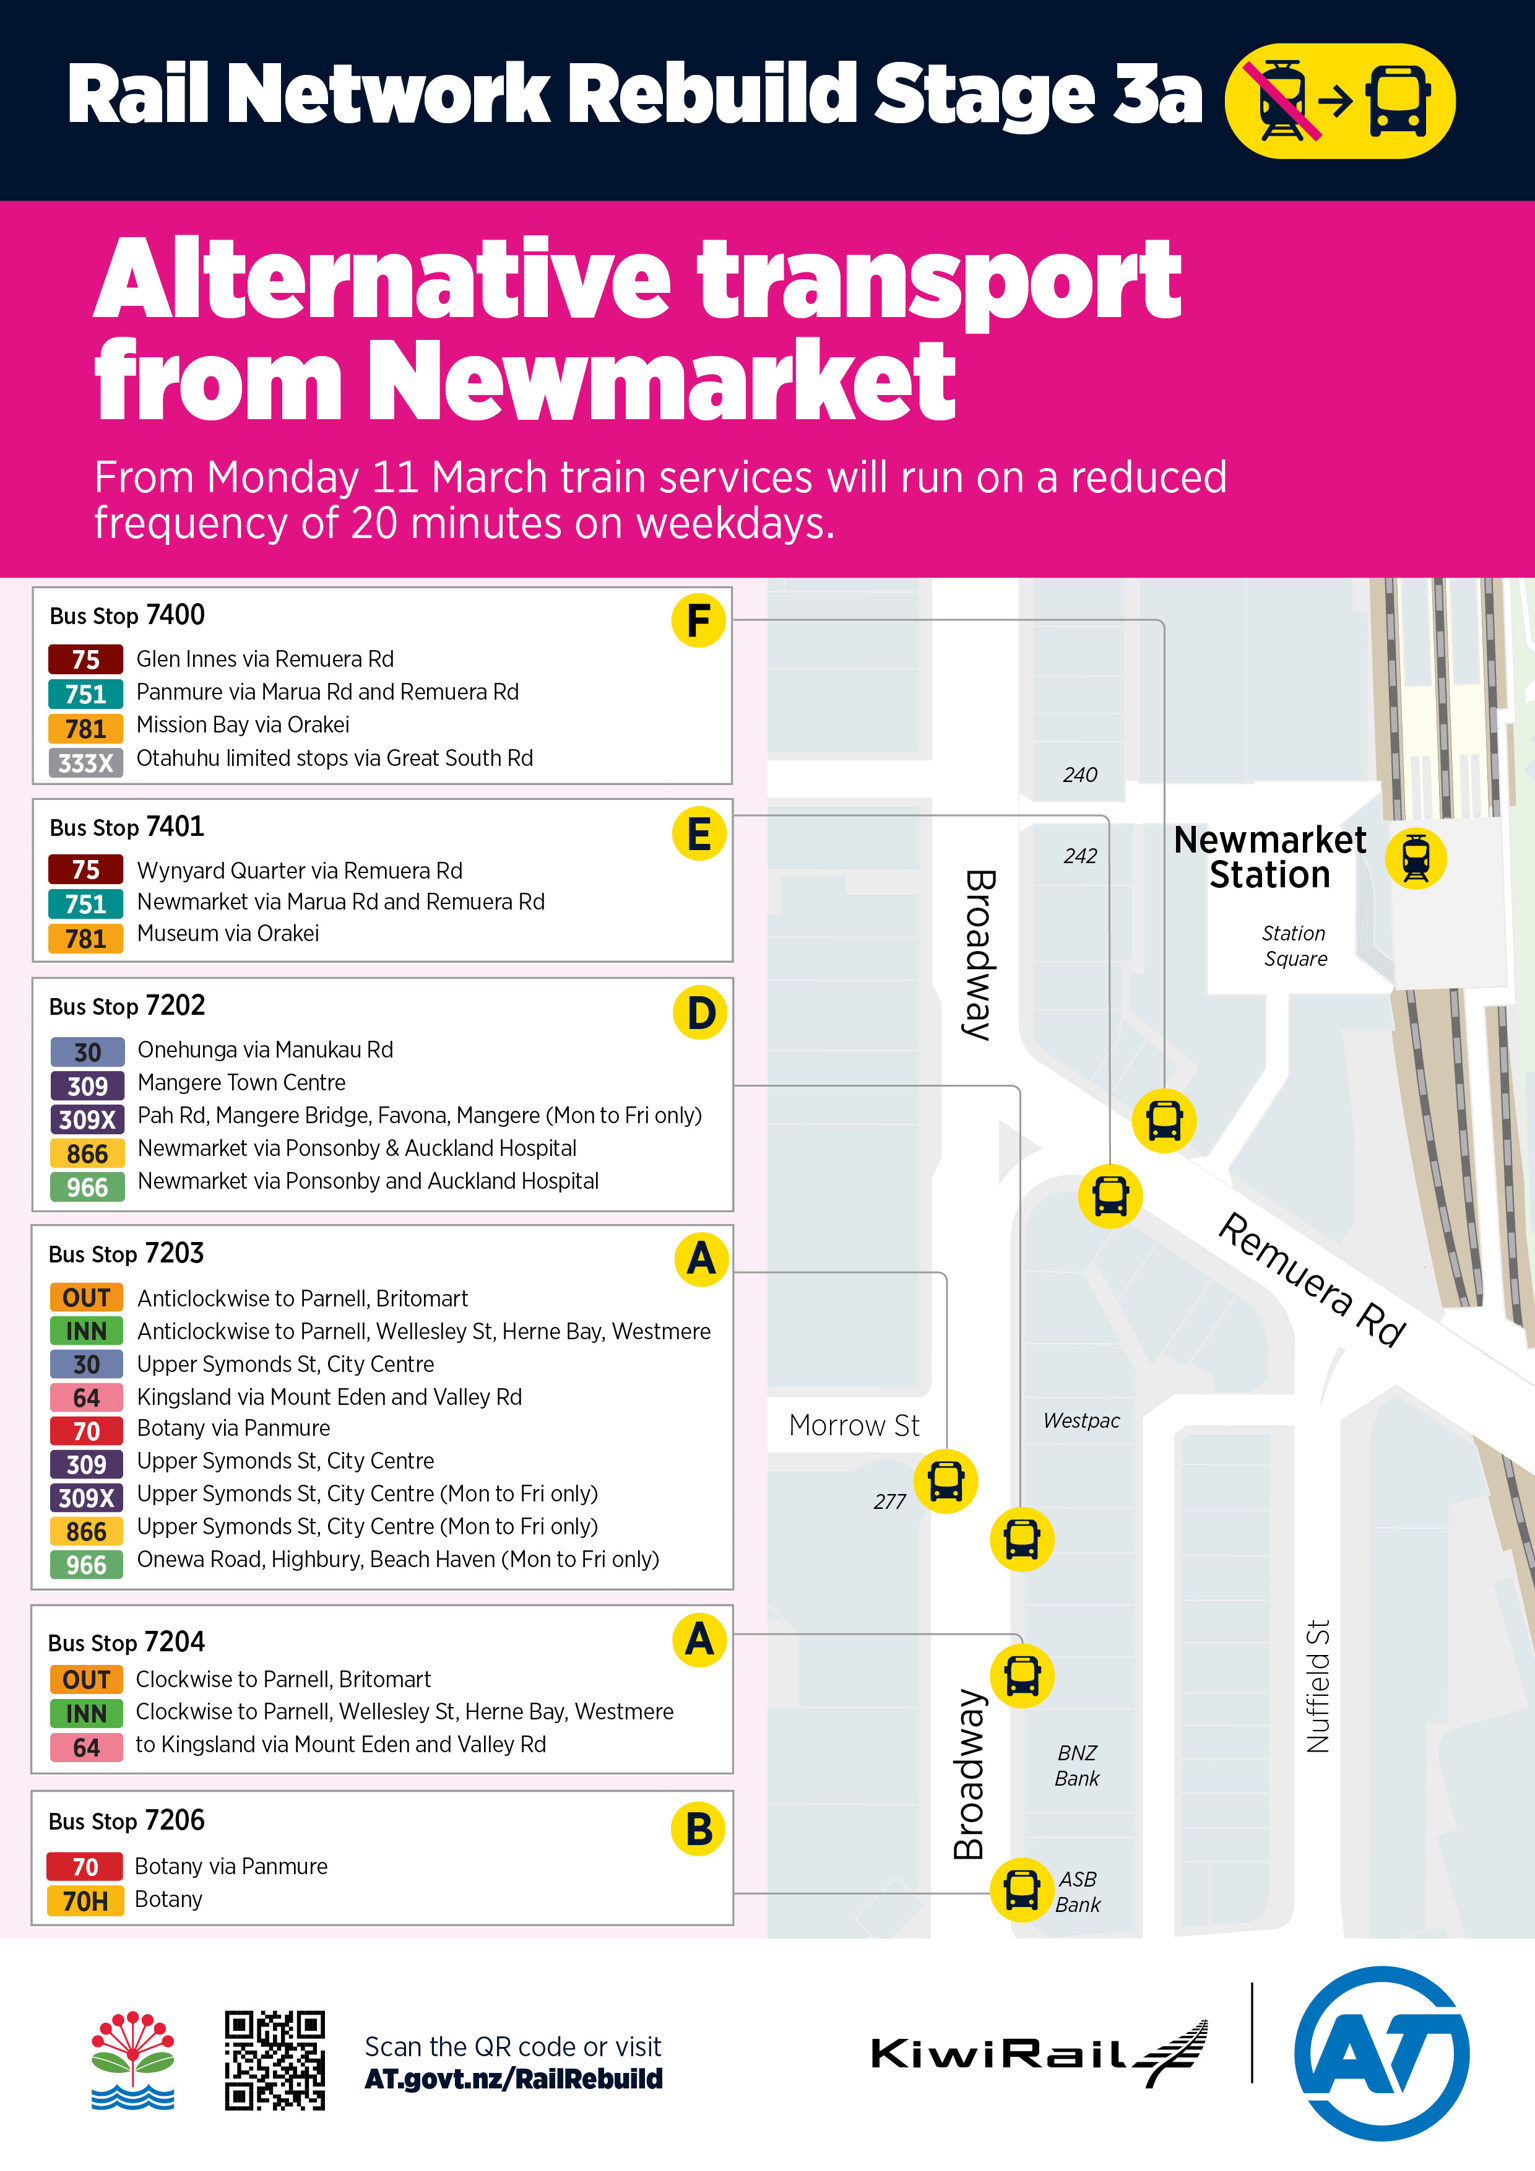 Poster showing alternative transport options from Newmarket Station during Stage 3 of the Rail Network Rebuild